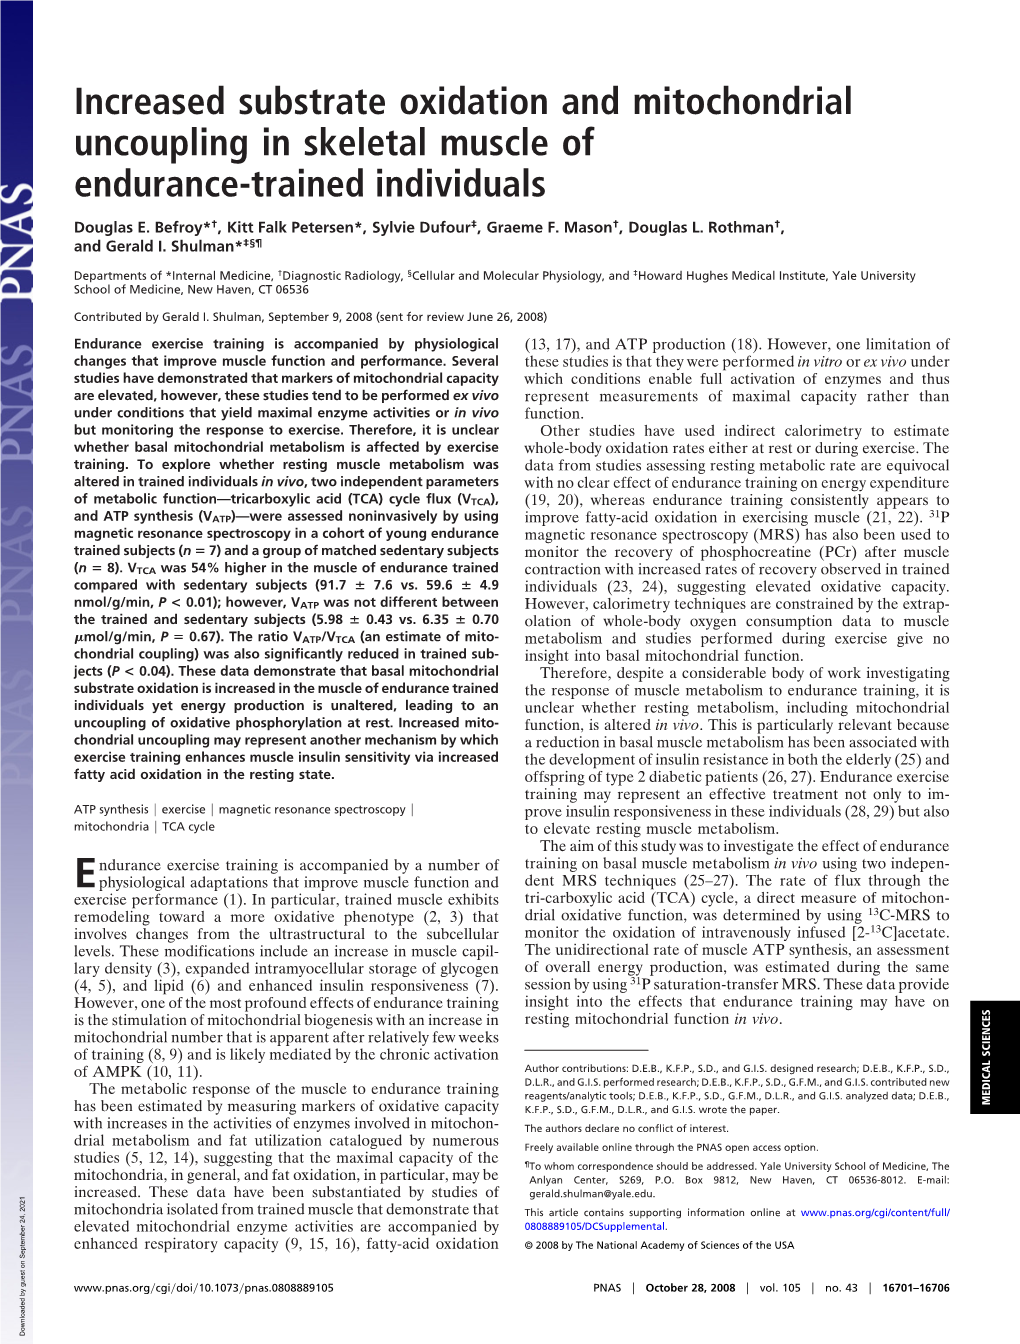 Increased Substrate Oxidation and Mitochondrial Uncoupling in Skeletal Muscle of Endurance-Trained Individuals